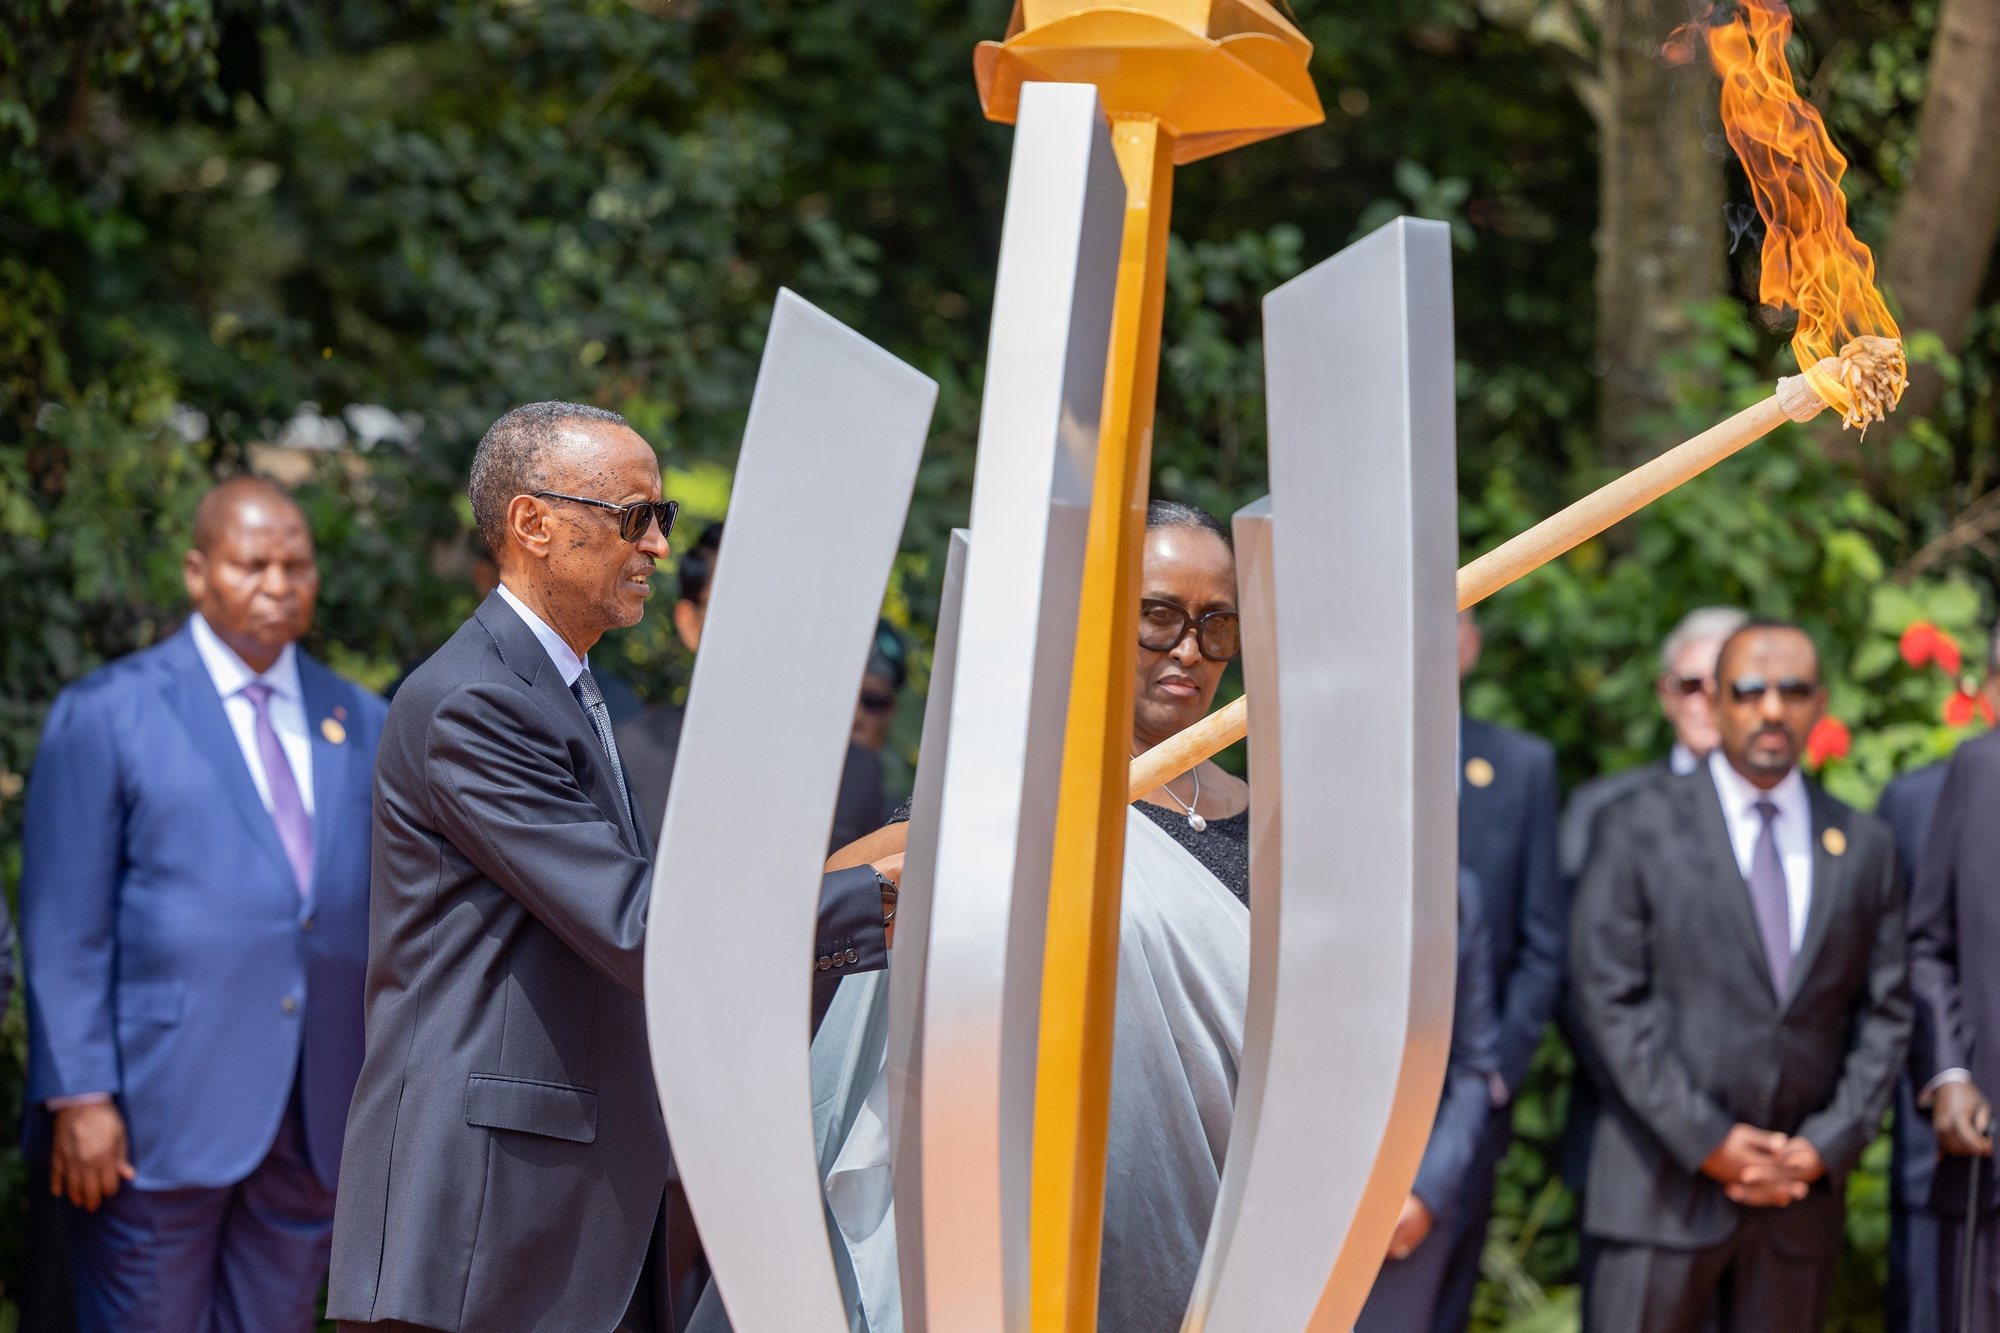 epa11263825 The President of Rwanda Paul Kagame (L) and first lady Jeannette Kagame (R) light up a flame during the commemoration ceremony of the 30th anniversary of the Tutsi genocide, also known as Kwibuka 30, in Kigali, Rwanda, 07 April 2024. Starting in 07 April 1994 and lasting until 15 July 1994 during the Rwandan Civil War, 800,000 people were killed by ethnic Hutu extremists targeting members of the minority Tutsi community.  EPA/MOISE NIYONZIMA